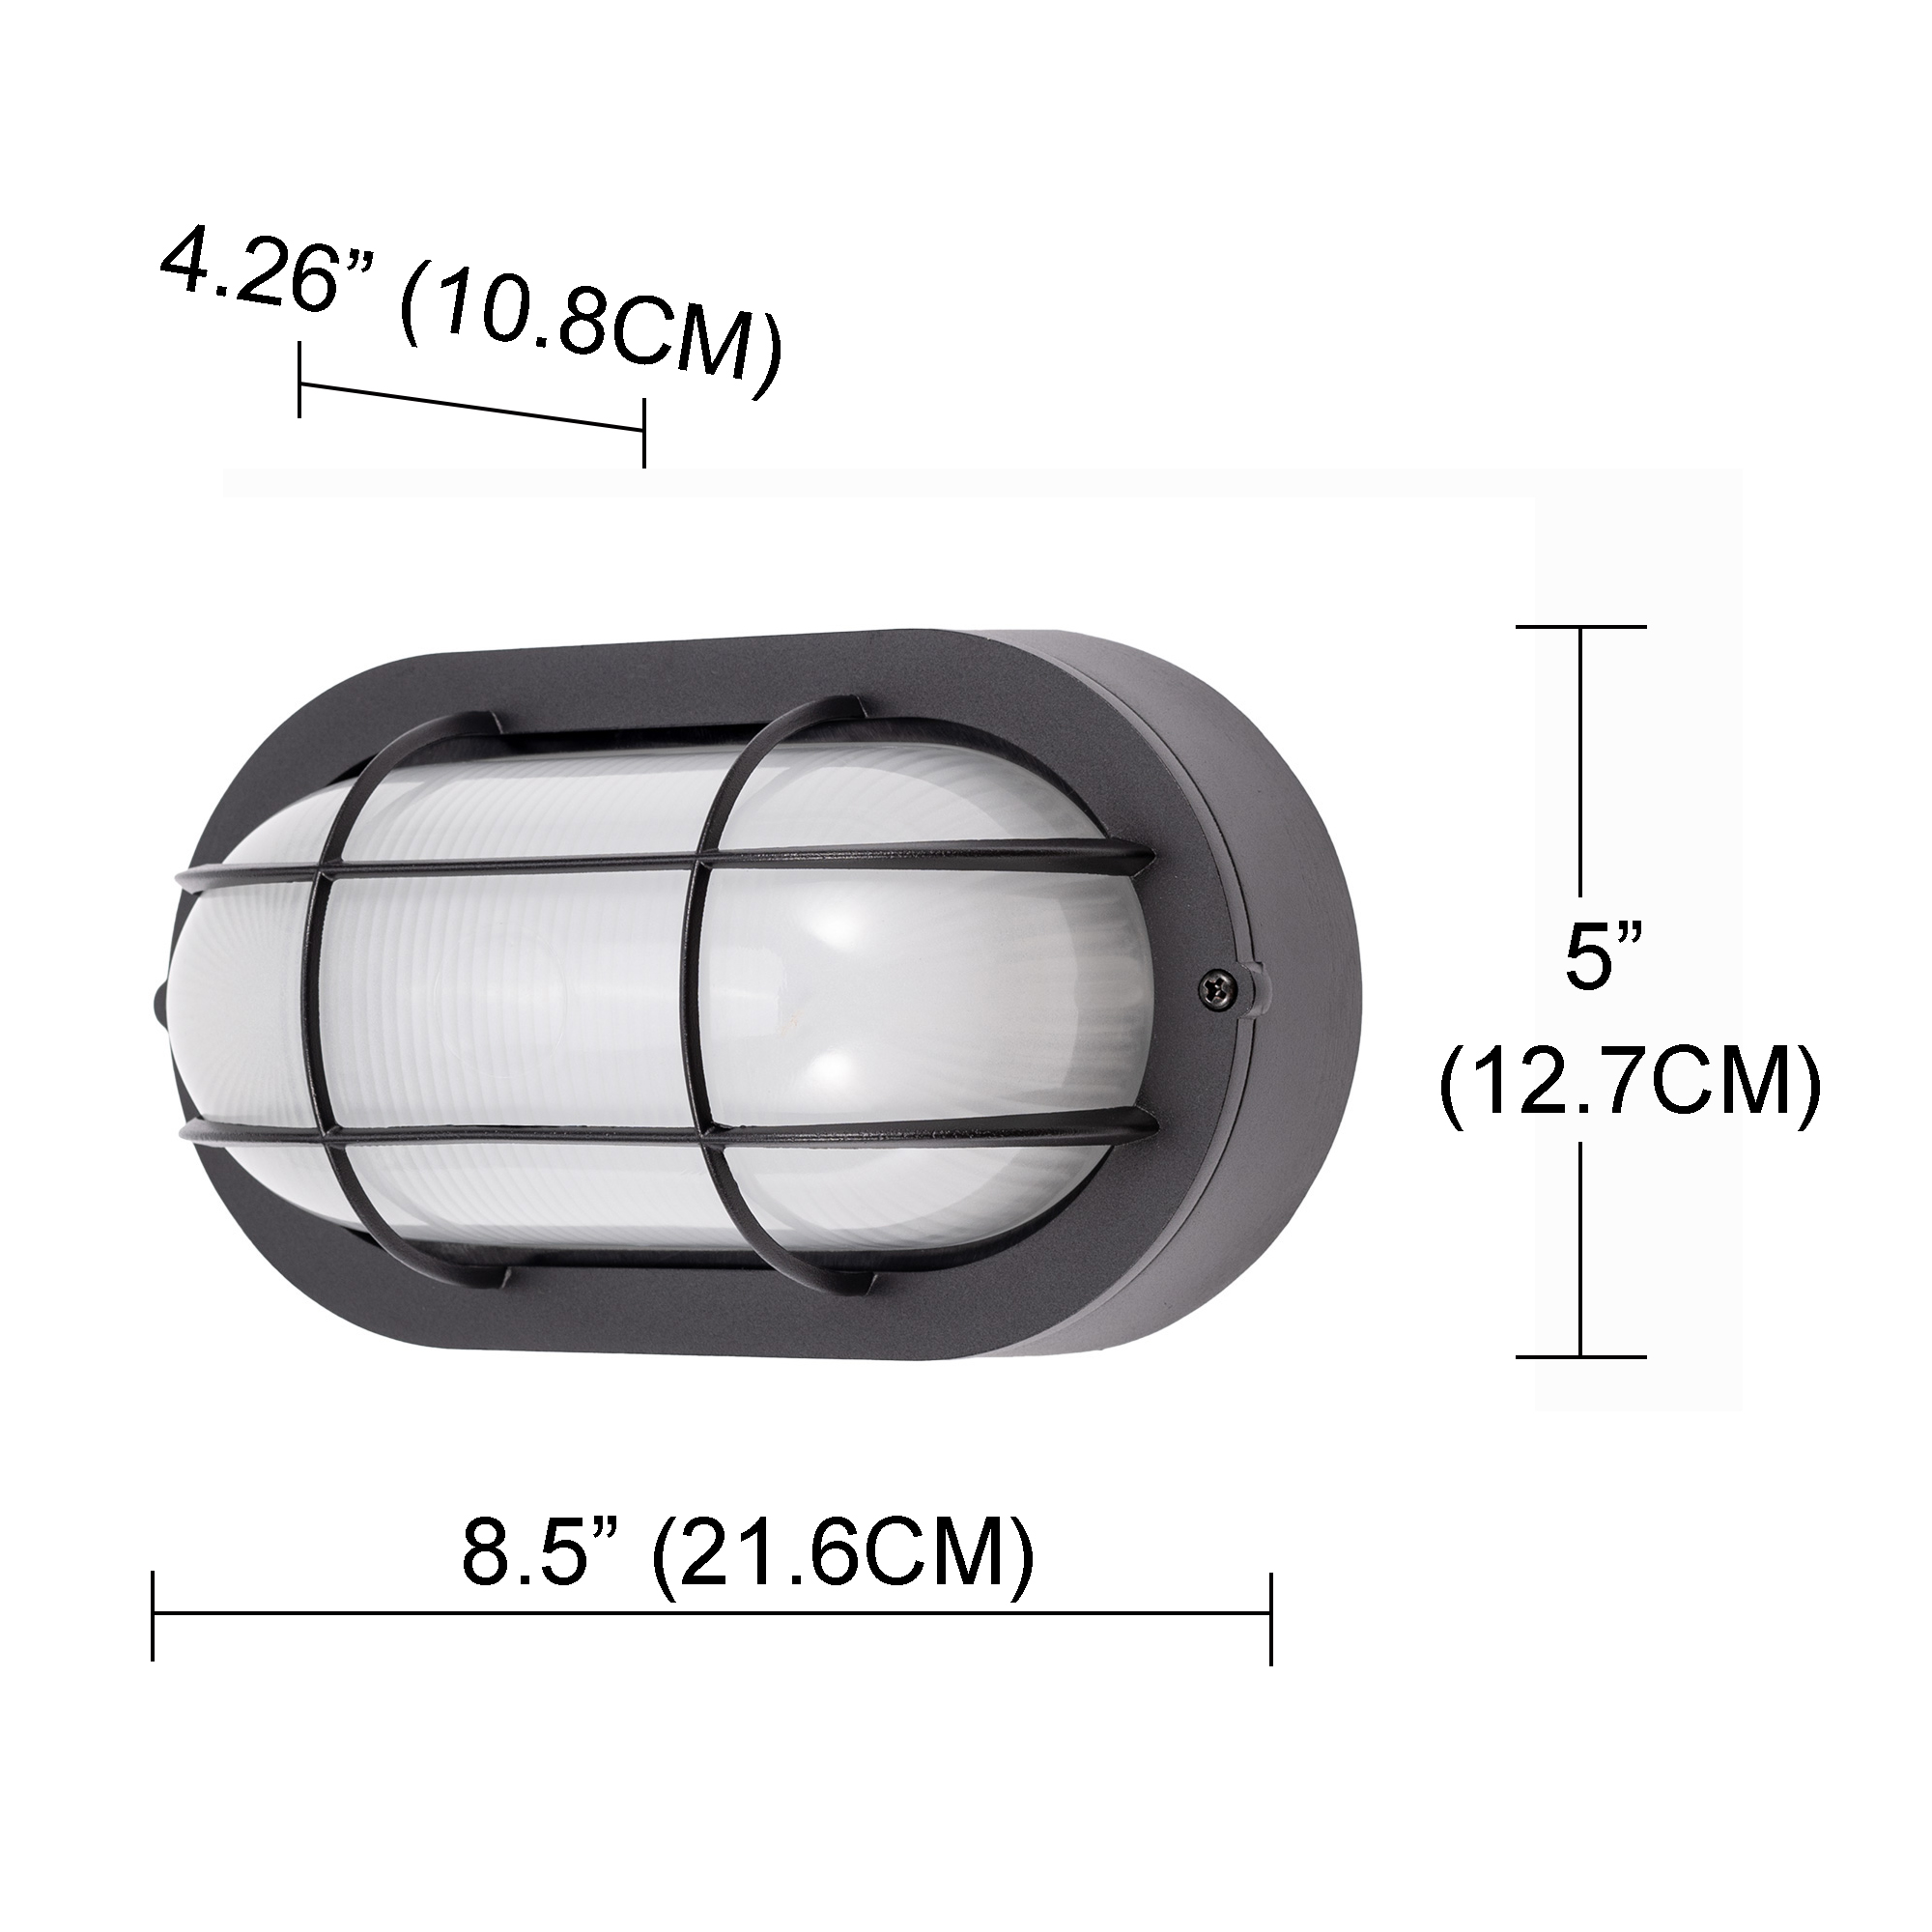 Gruenlich LED Bulkhead Light Worked as Wall Lantern Wall Sconce or Flush Mount Ceiling Light, 6W Replace 60W, 520 Lumen, Dimmable 5000K Daylight White, Water-Proof for Outdoor, 1-Pack